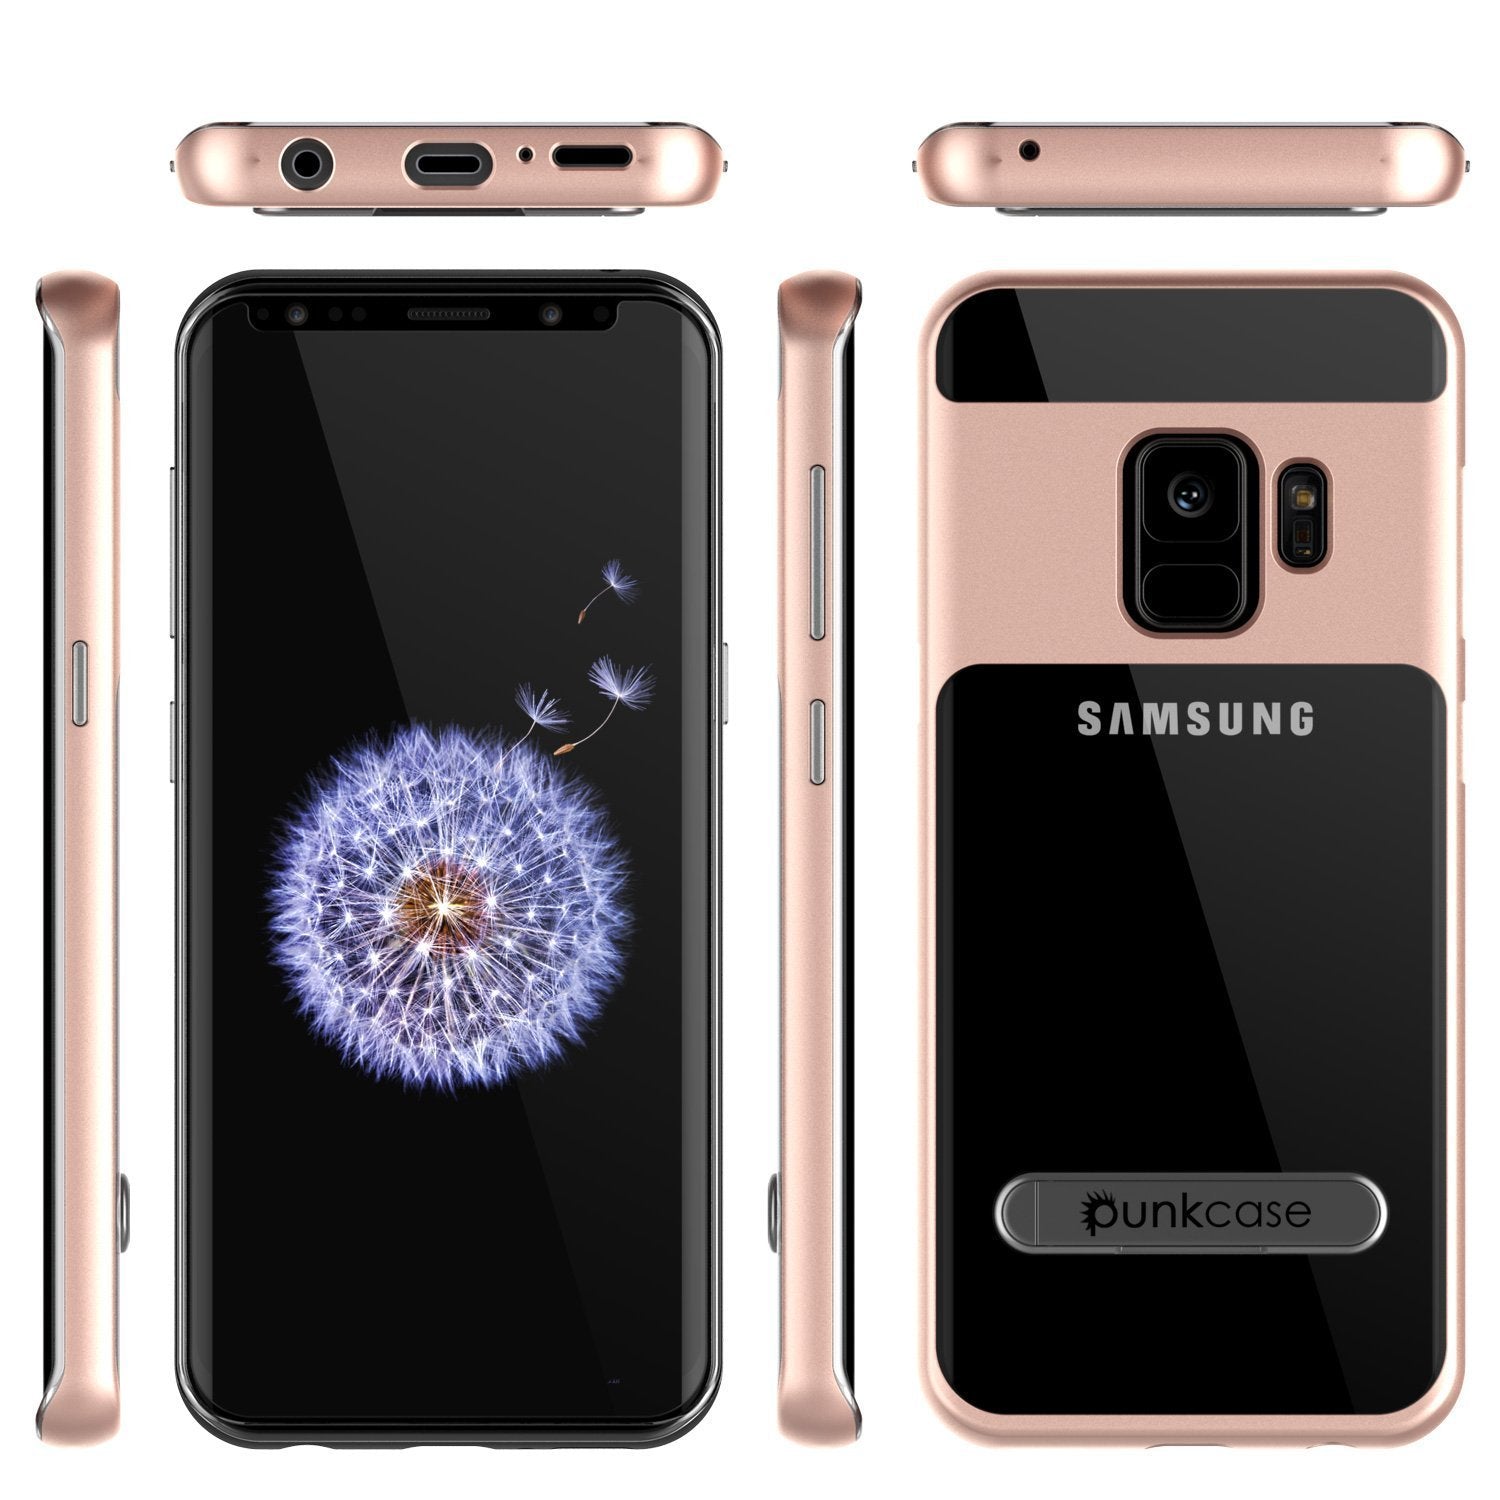 Galaxy S9 Punkcase, LUCID 3.0 Series Cover w/Kickstand, Rose Gold